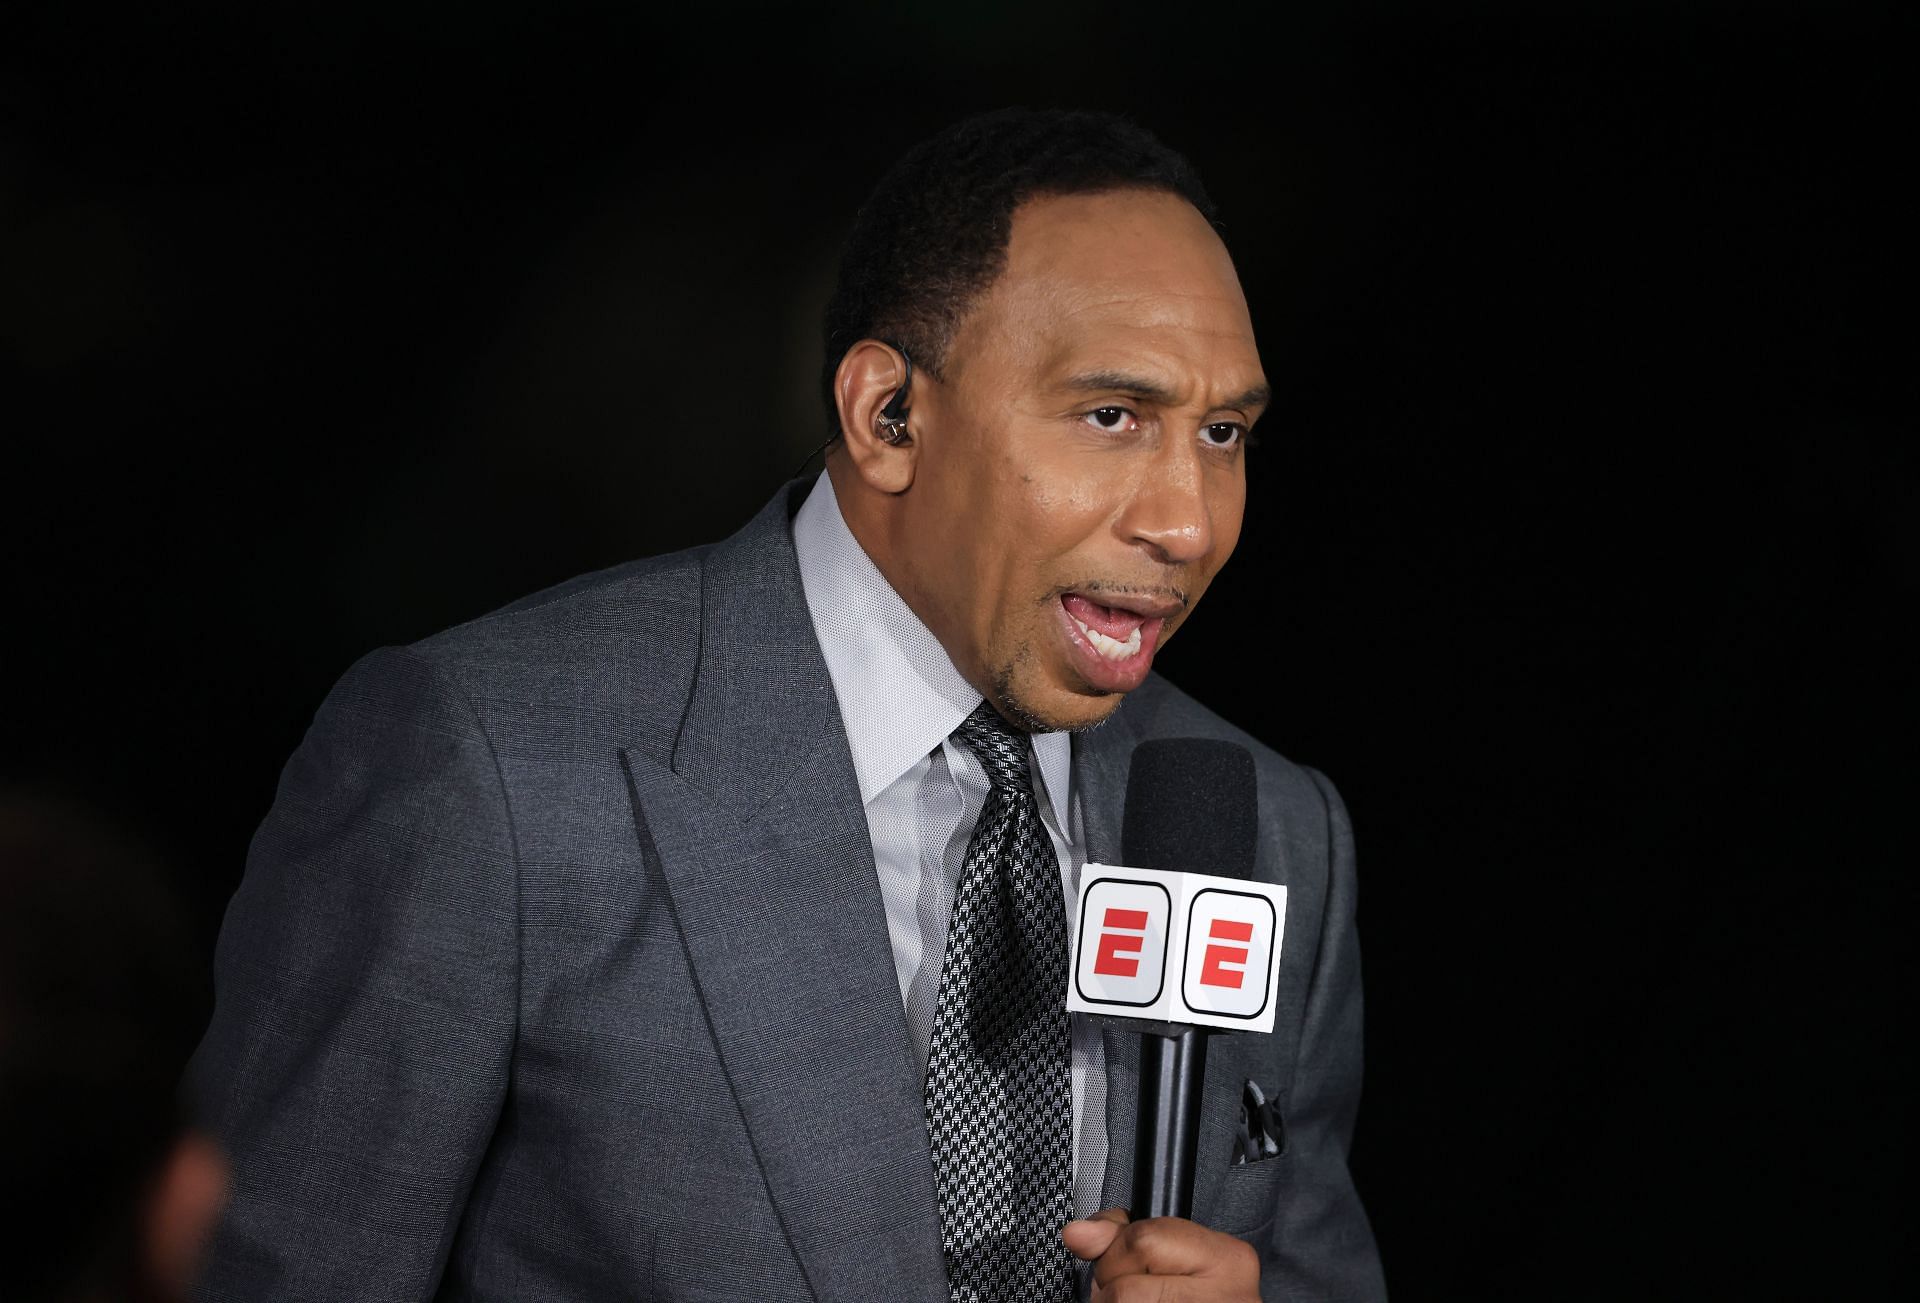 Stephen A. Smith at the 2021 NBA Finals - Game Three